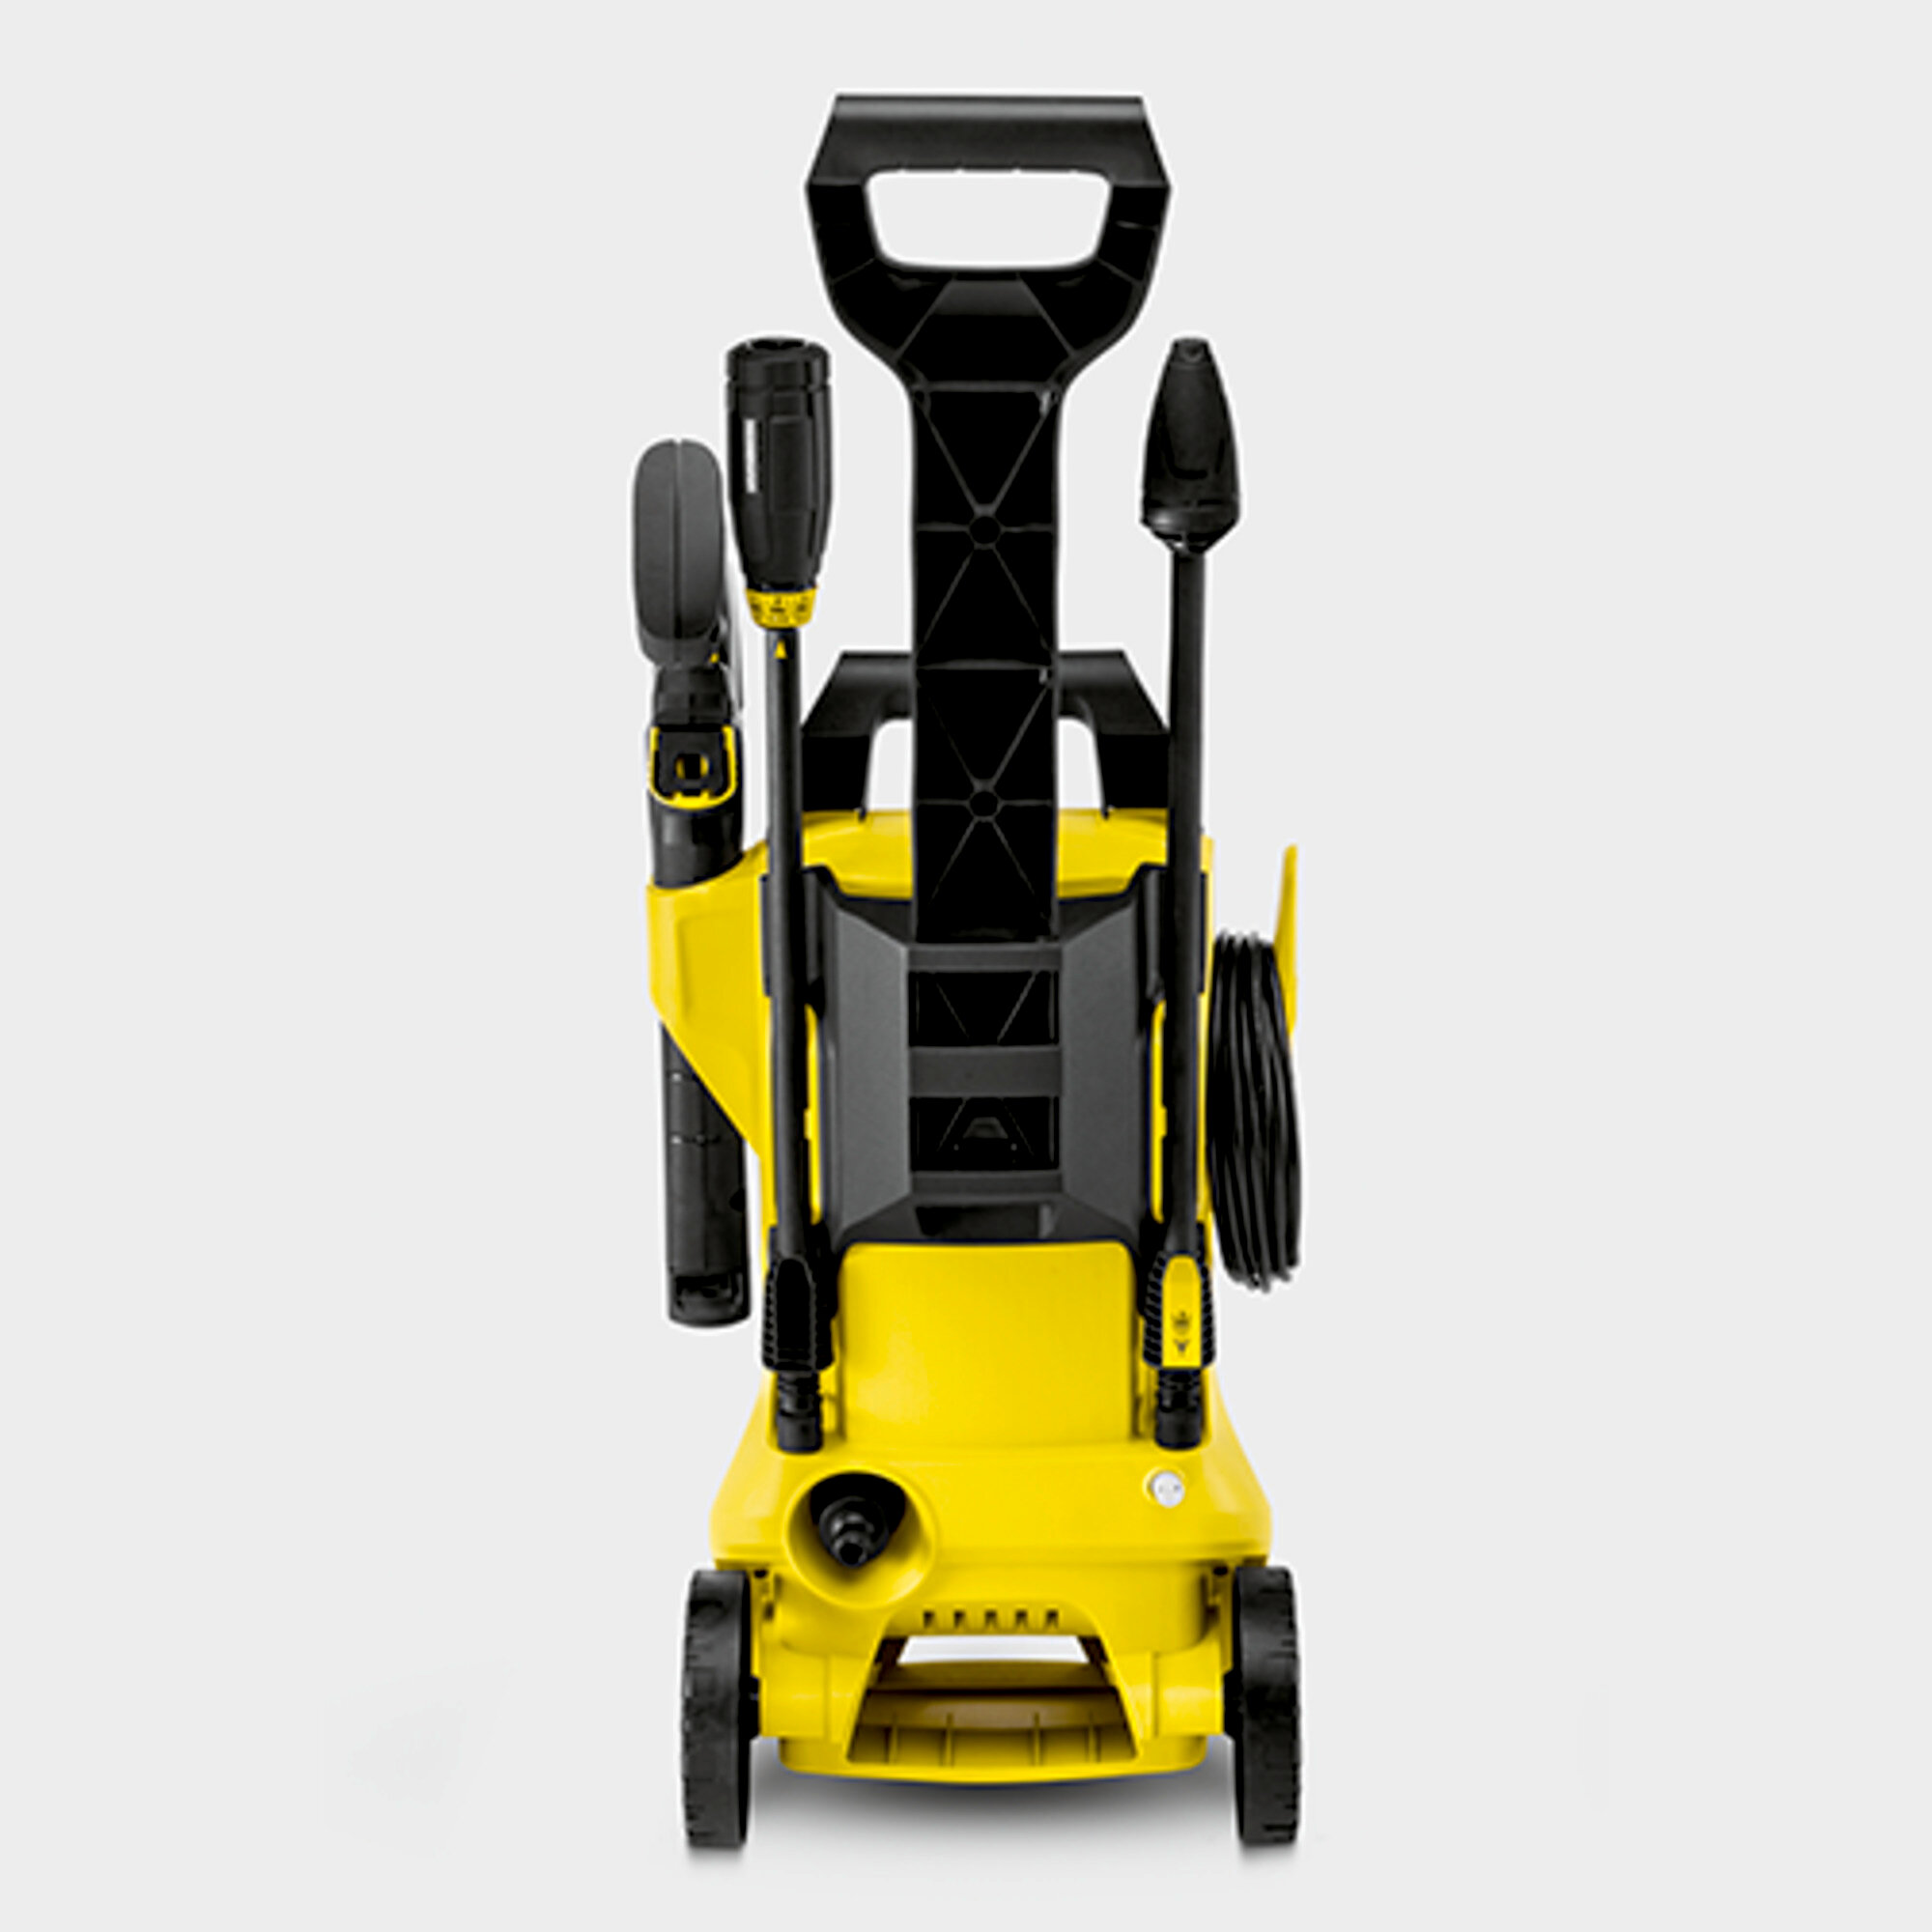 Pressure washer K 2 Full Control Home: Supports for accessories, high-pressure gun and cable